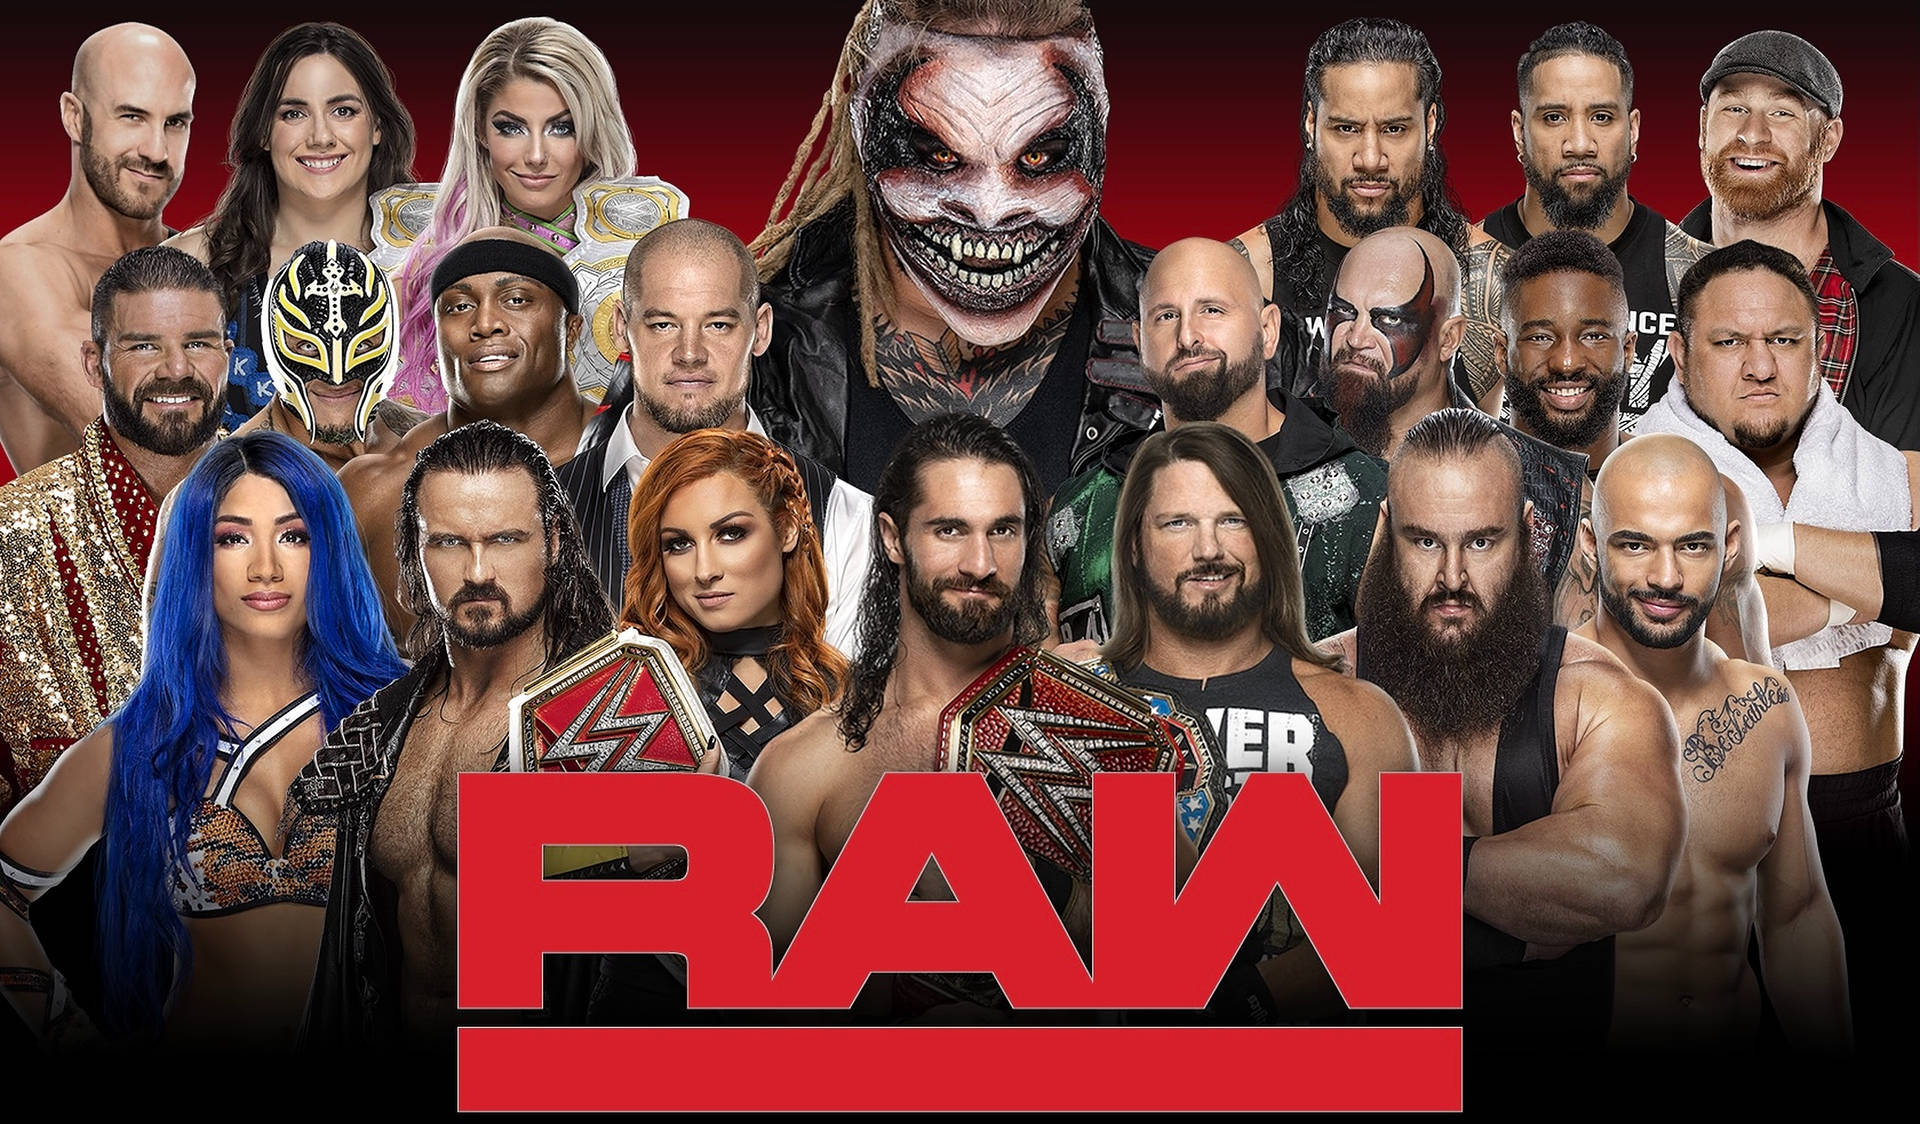 Wwe 2351X1376 Wallpaper and Background Image